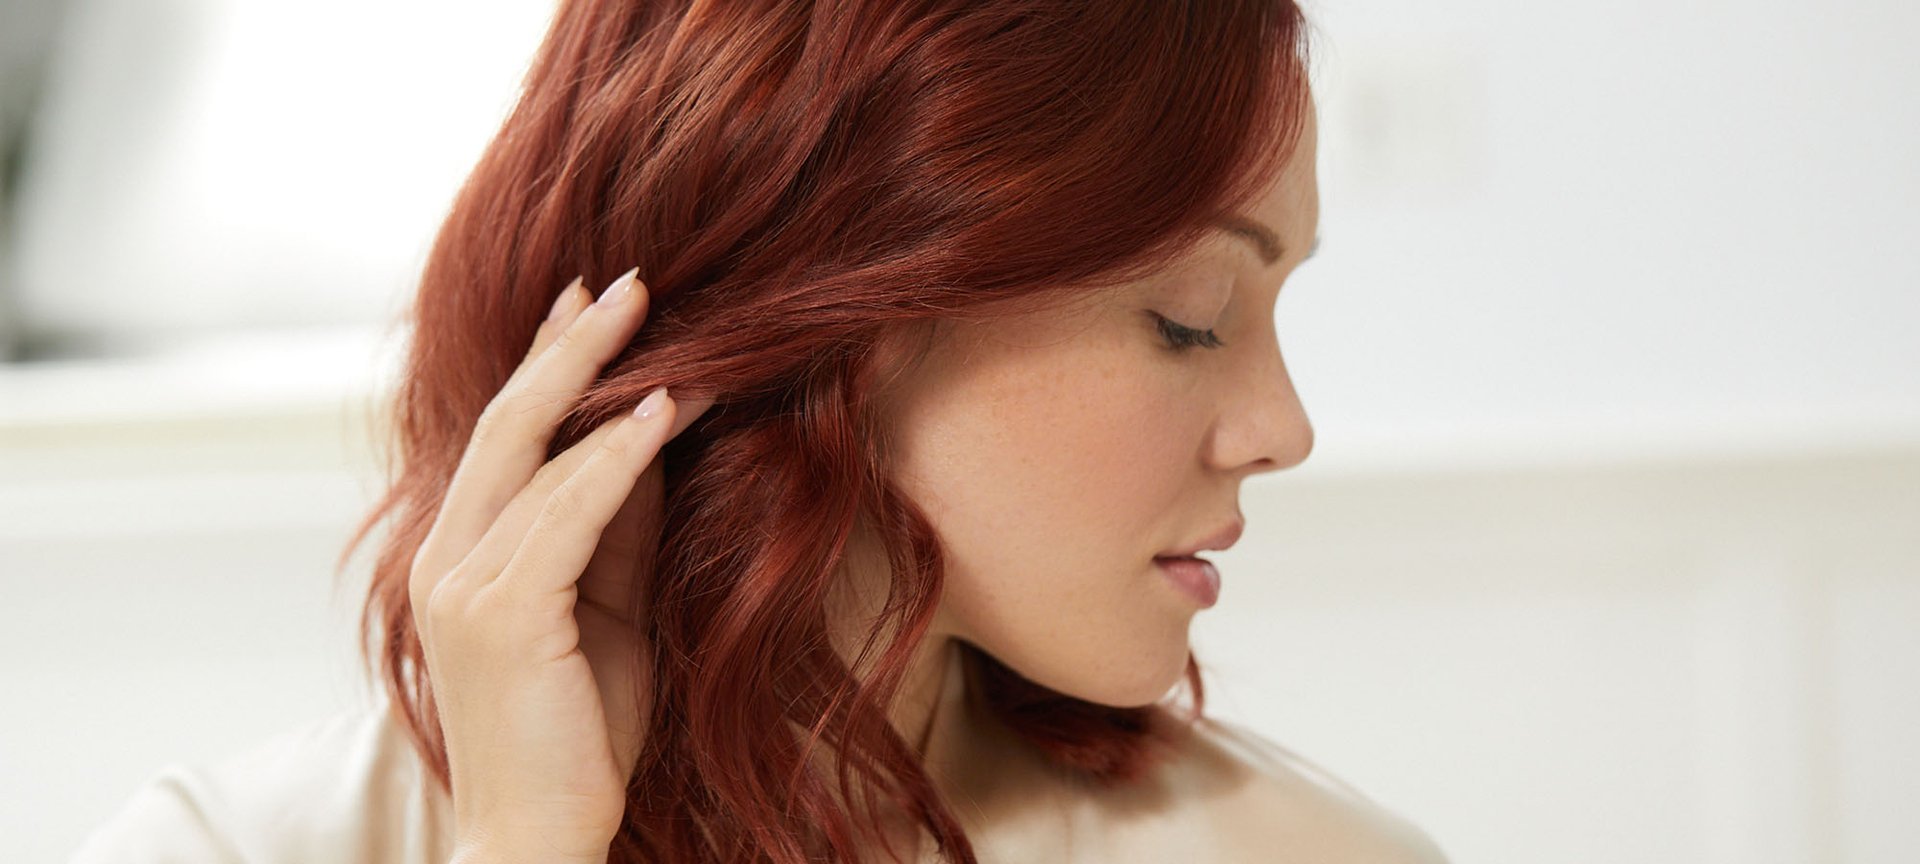 https://www.lorealparisusa.com/-/media/project/loreal/brand-sites/oap/americas/us/beauty-magazine/2023/10-october/10-6/how-to-get-auburn-hair/a-person-with-auburn-hair.jpg